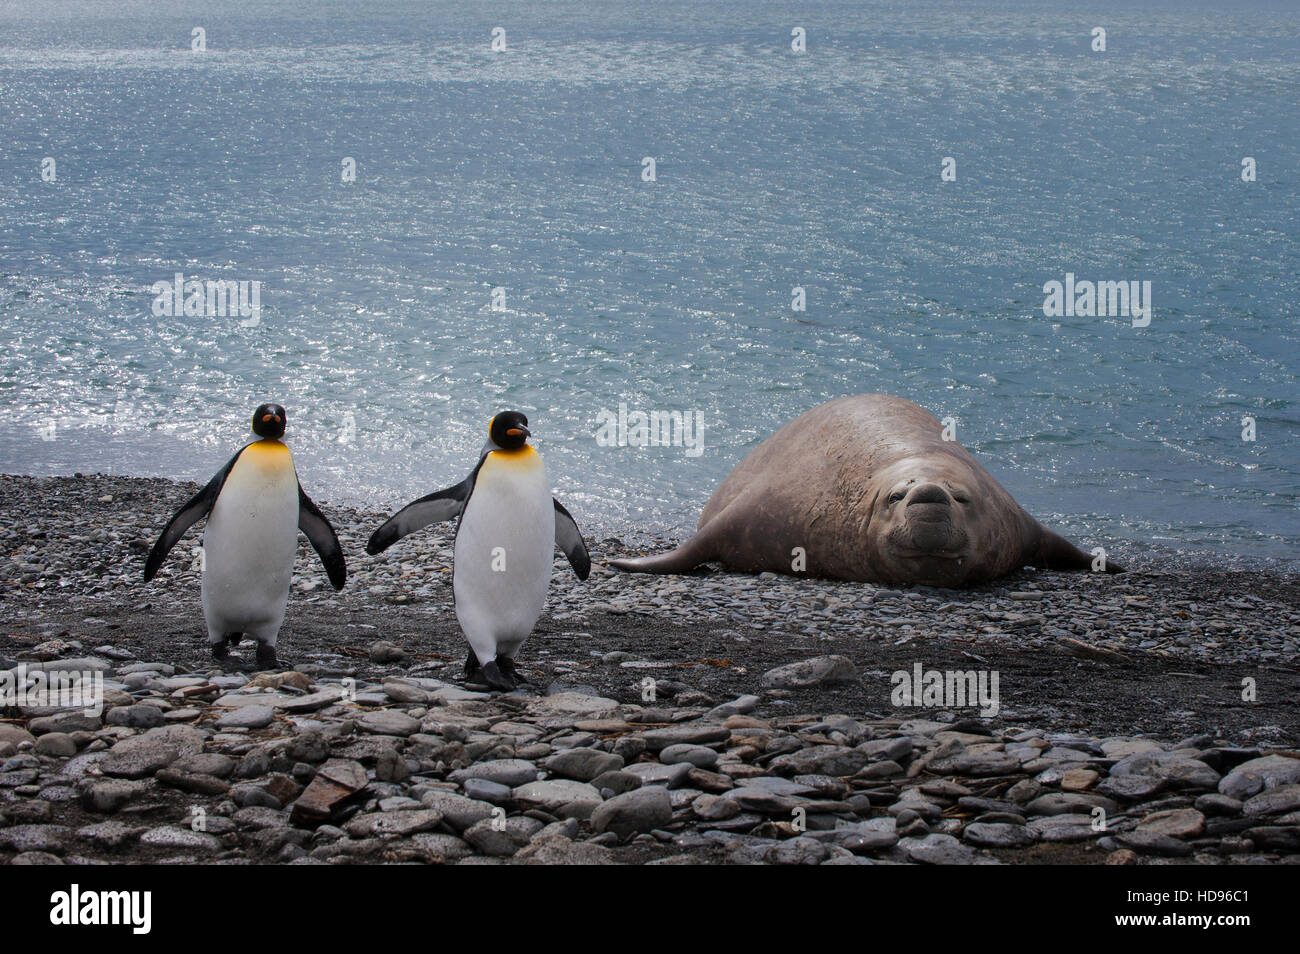 King penguins walking in front of a Southern Elephant Seal (Mirounga leonina) lying on the shore, Fortuna Bay, South Georgia Island Stock Photo